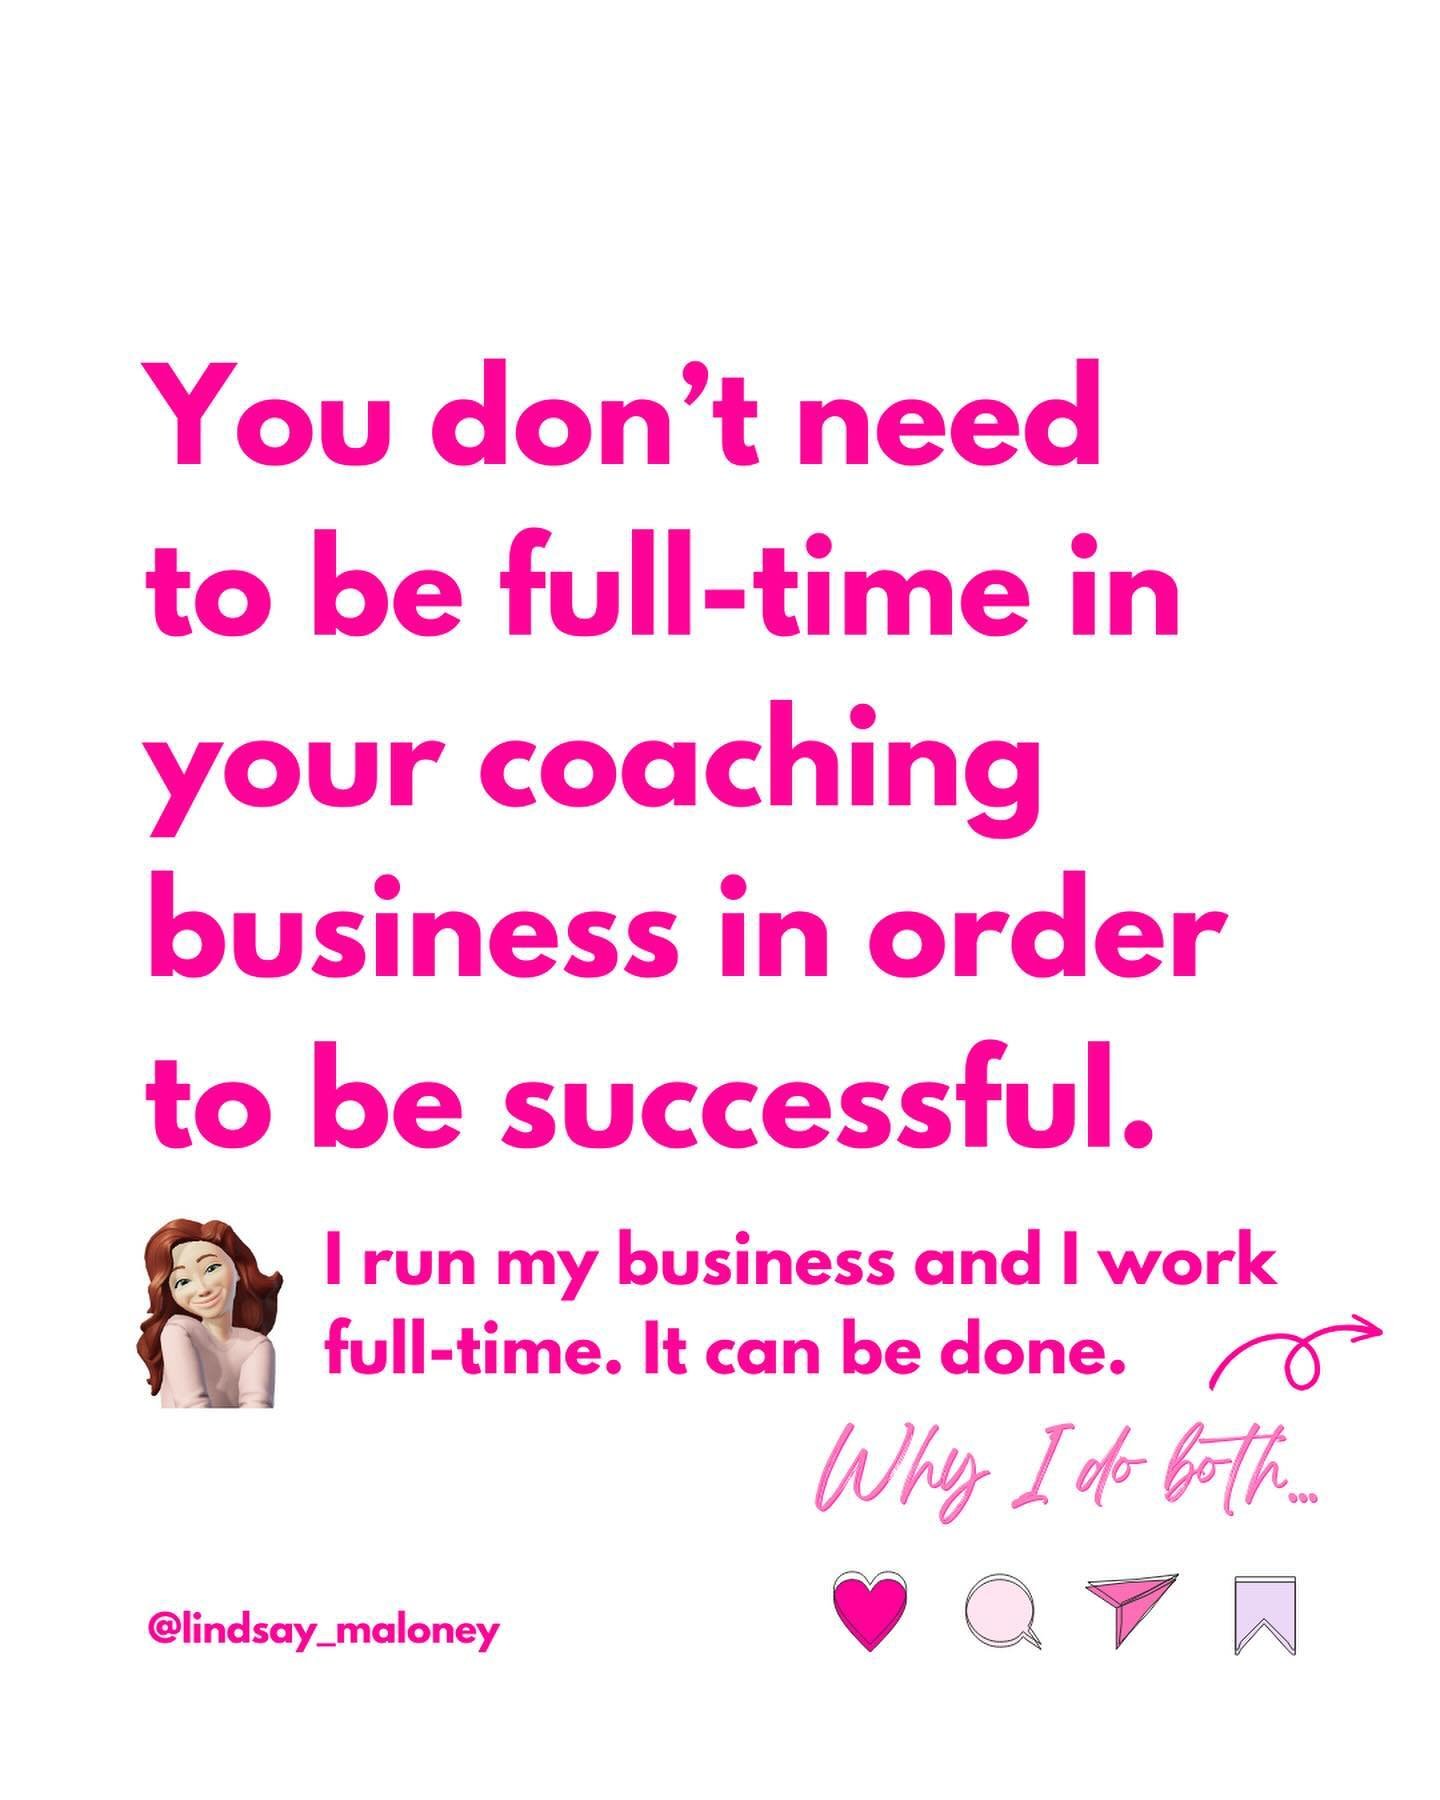 🚨 You don&rsquo;t need to be full-time in your coaching business in order to be successful. 

👉🏻 For one thing, having the support of my job has made things so much easier! 

Having my full-time job alongside running a business has allowed me to: 